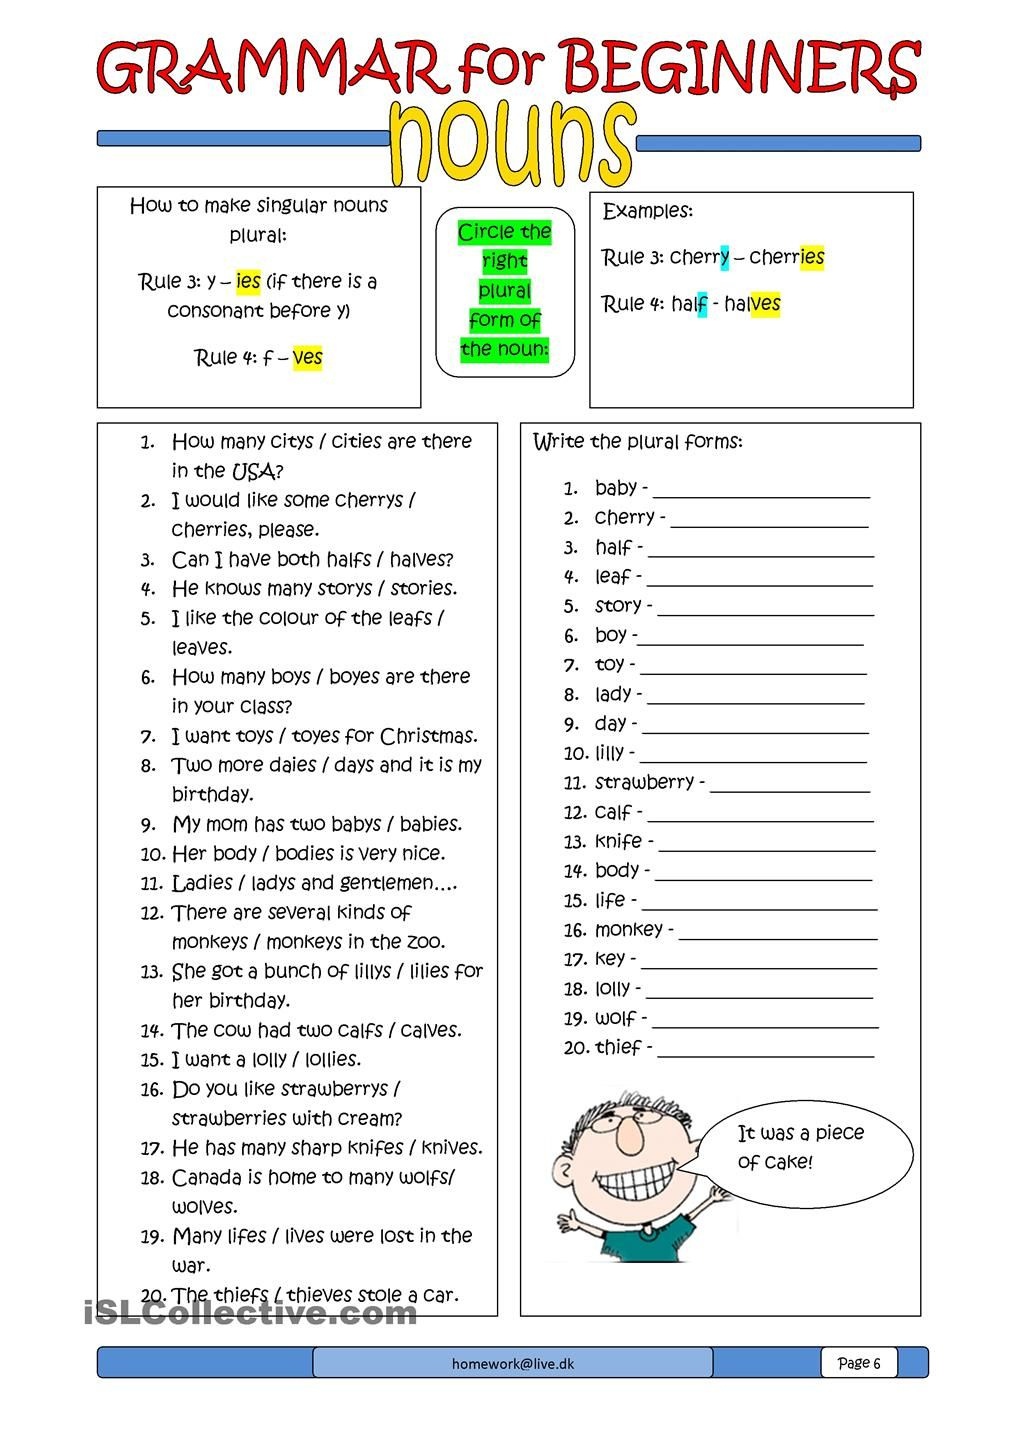 This Is Amy Simple Reading Comprehension Worksheet Free Esl Free 